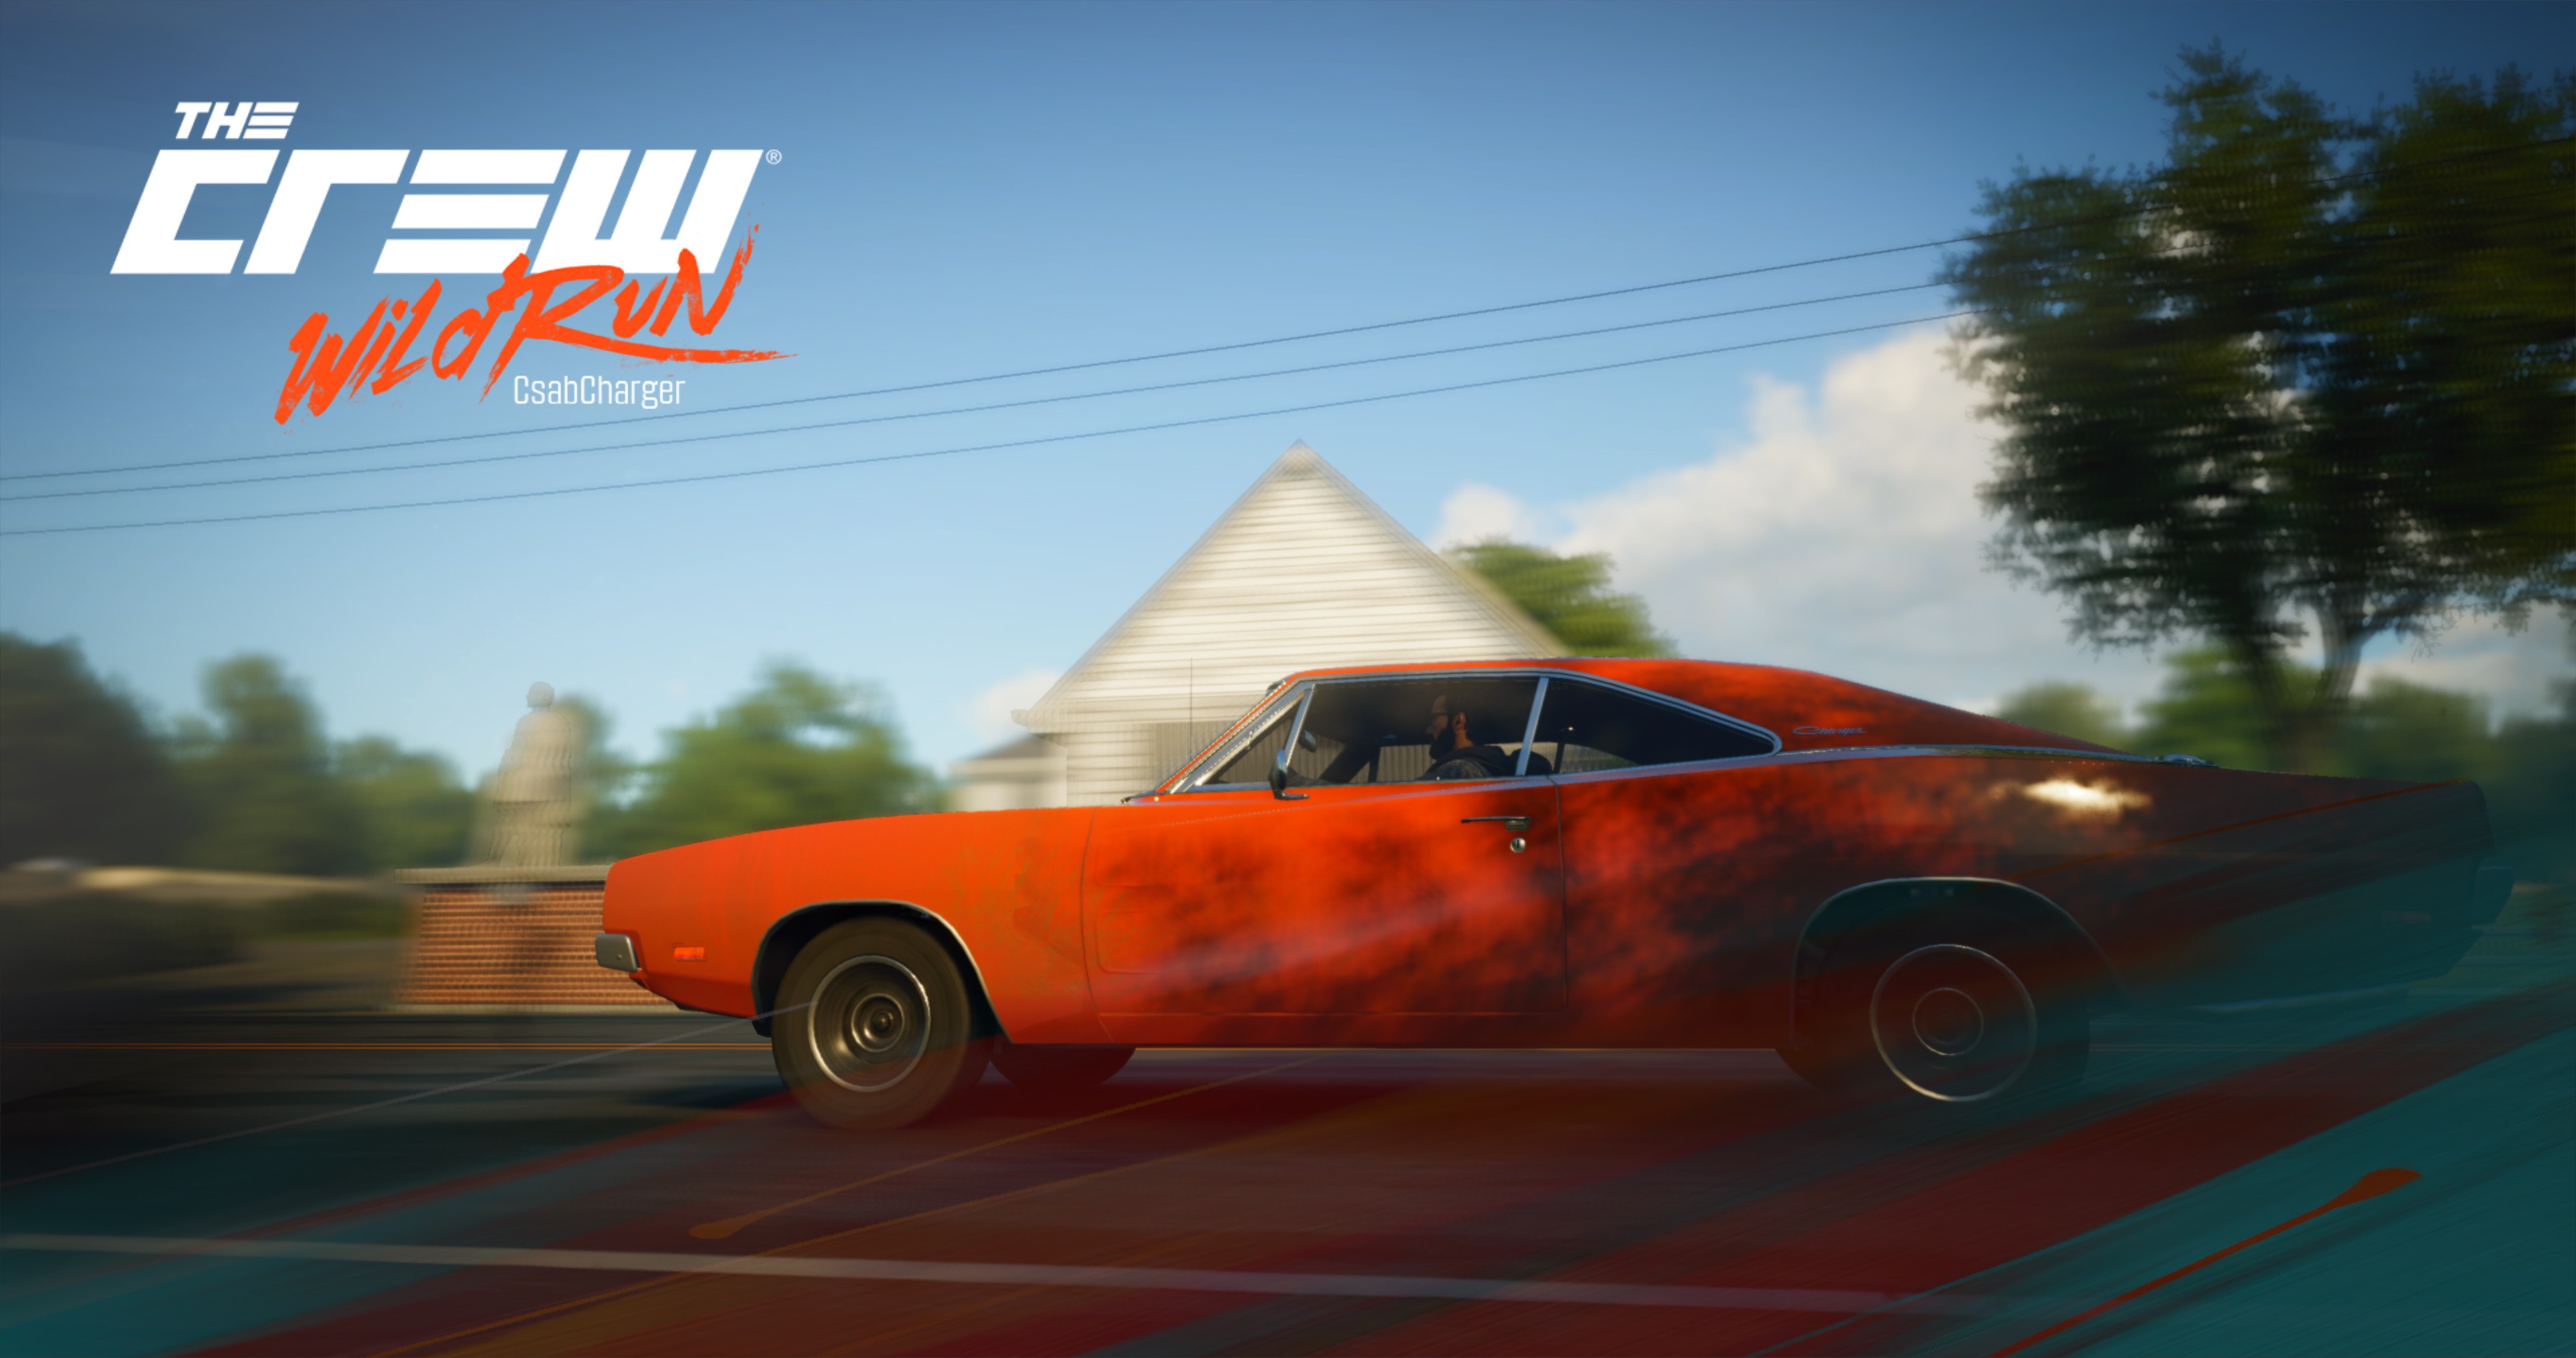 Dodge Charger R T 1968 Race Cars The Crew The Crew Wild Run 4096x2160